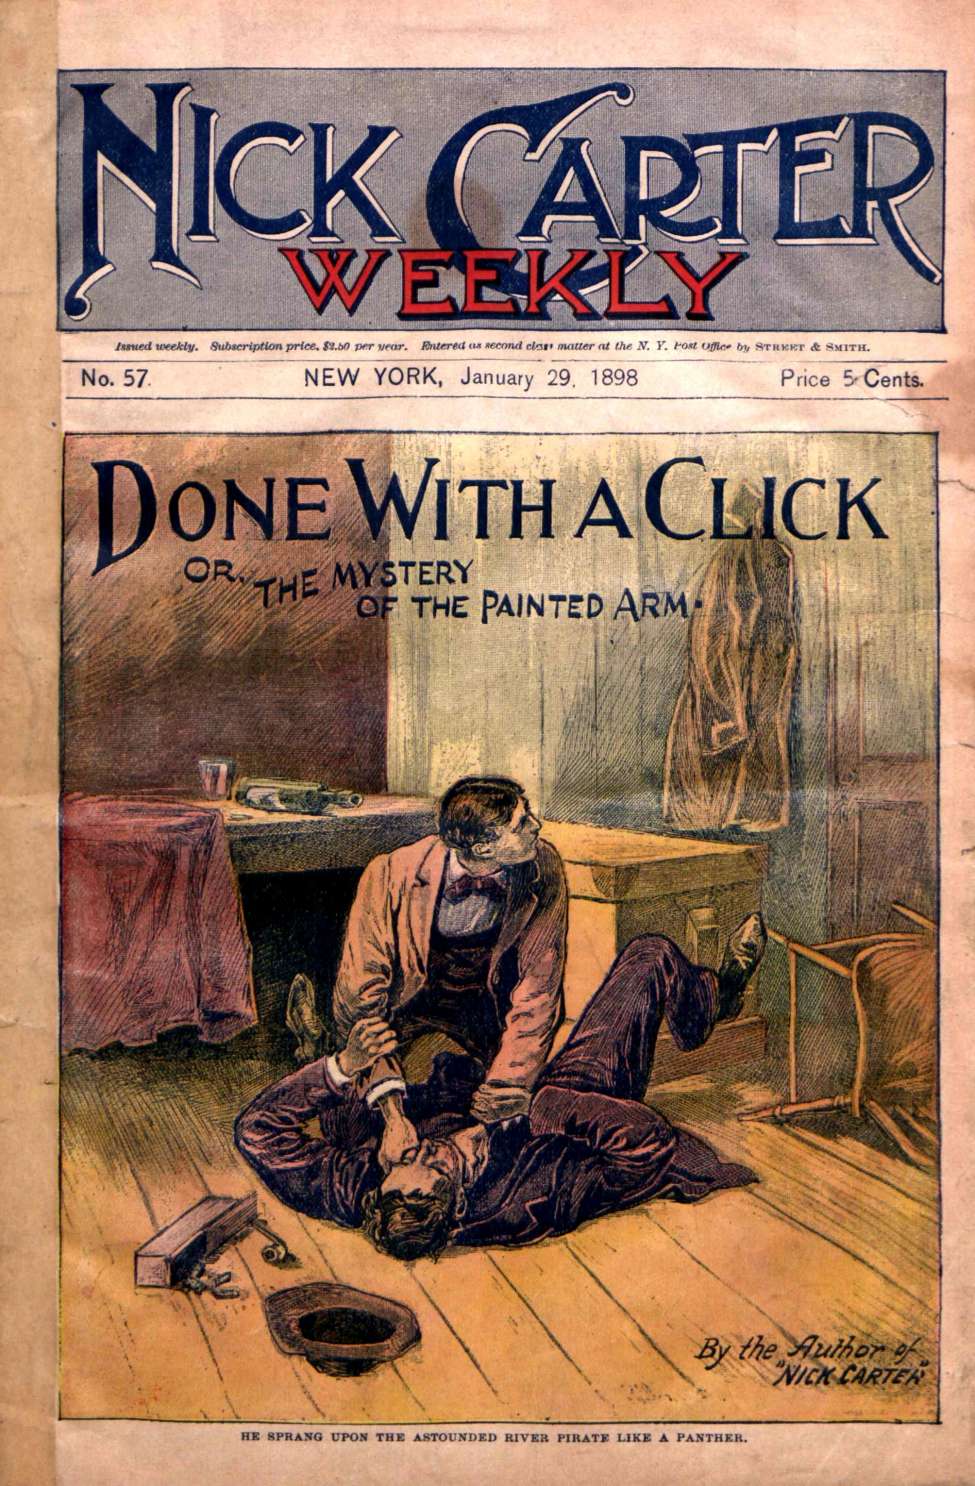 Comic Book Cover For Nick Carter Weekly 57 - Done With A Click